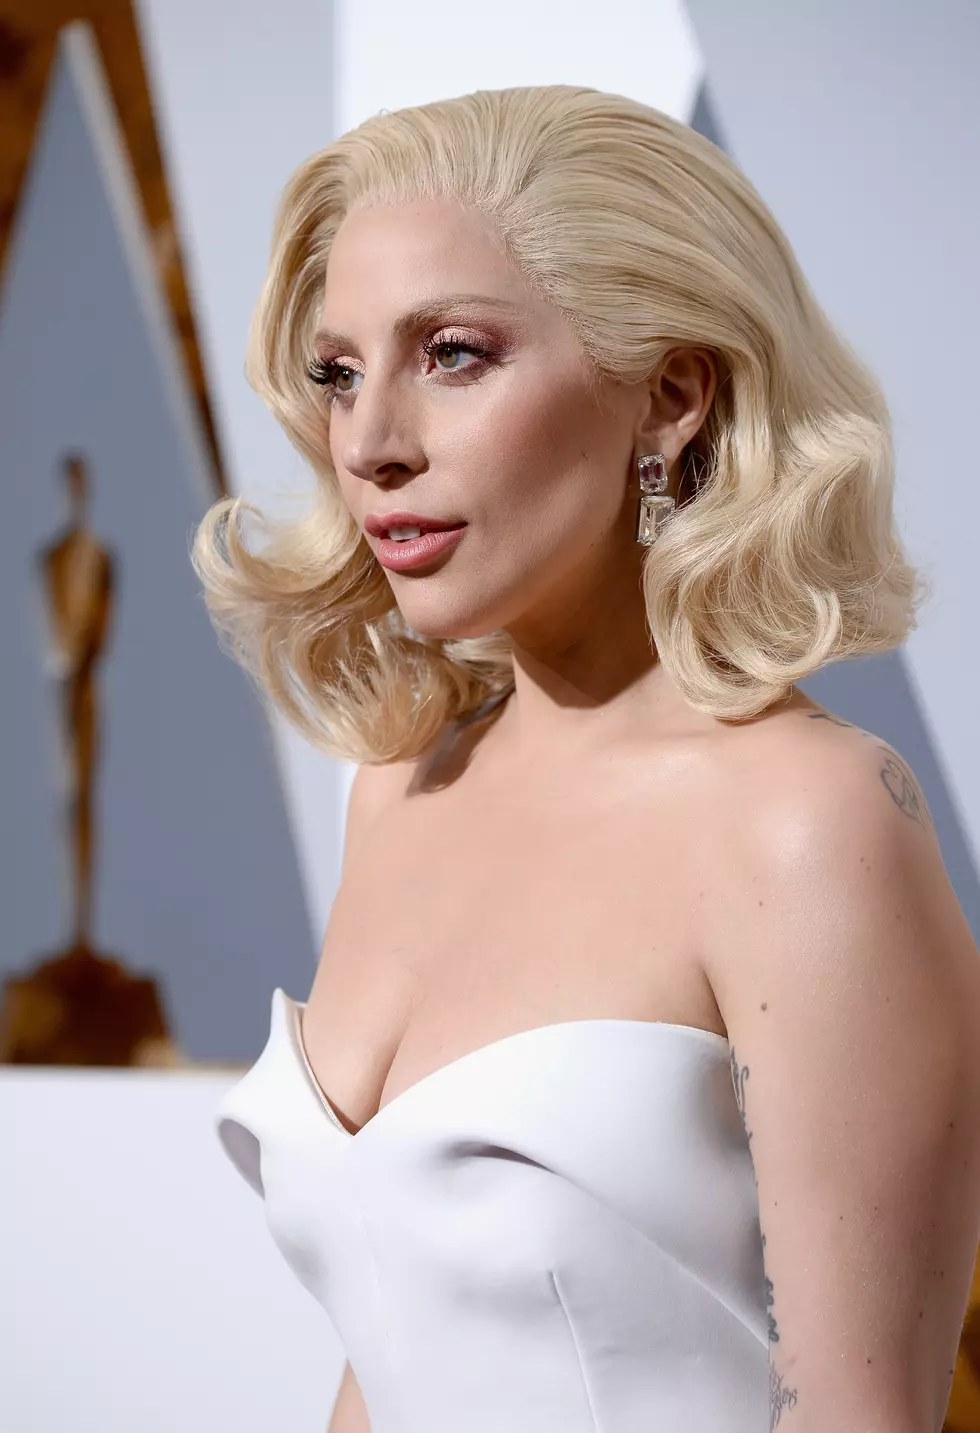 Lady Gaga’s Inspirational ’Til It Happens to You’ Oscar Performance